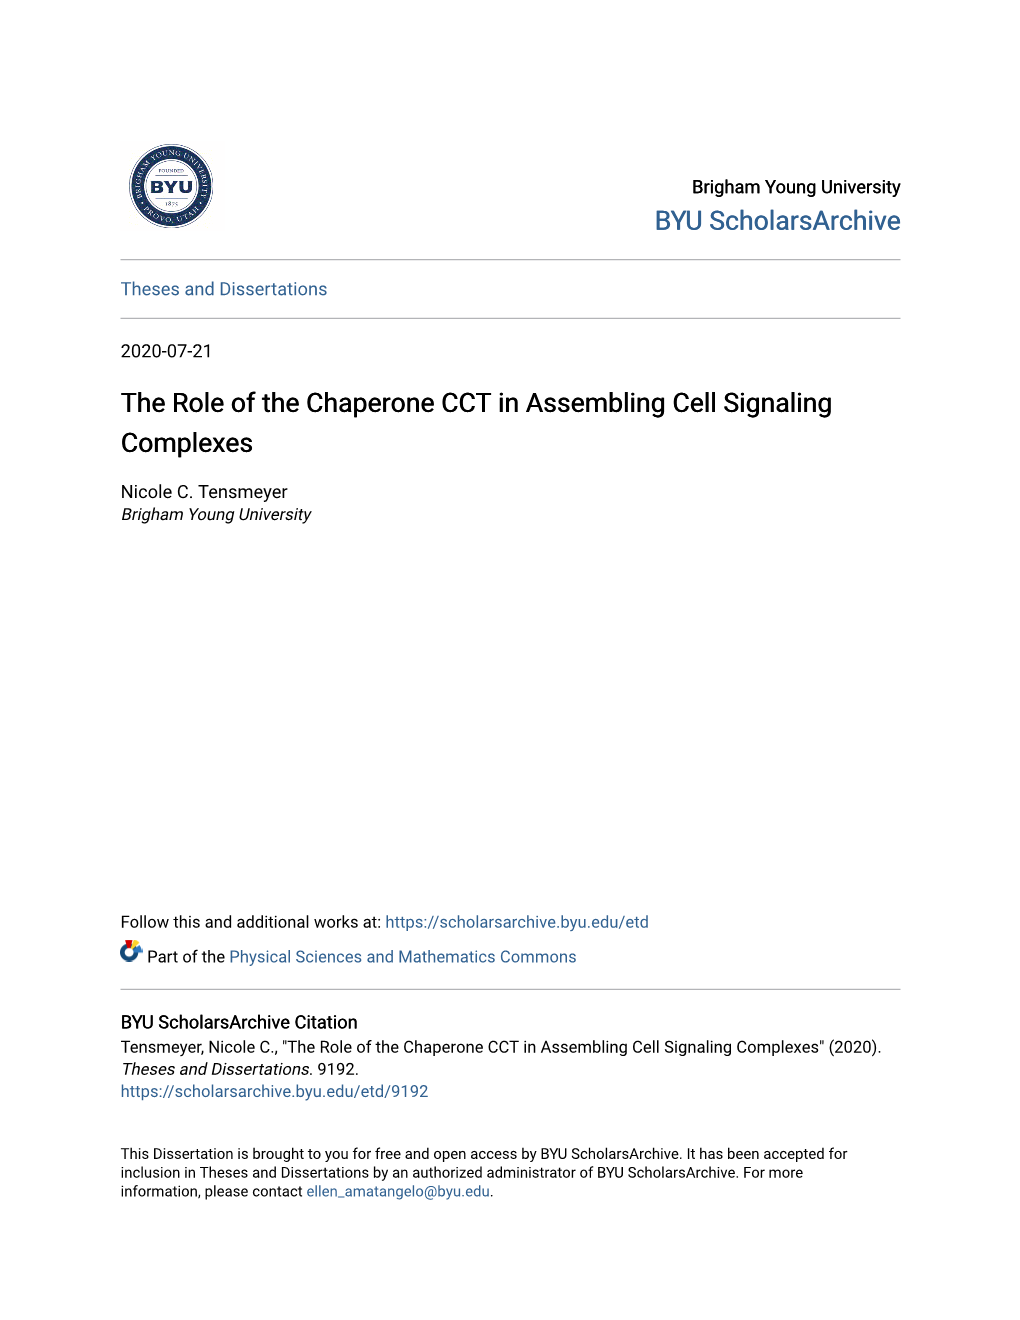 The Role of the Chaperone CCT in Assembling Cell Signaling Complexes